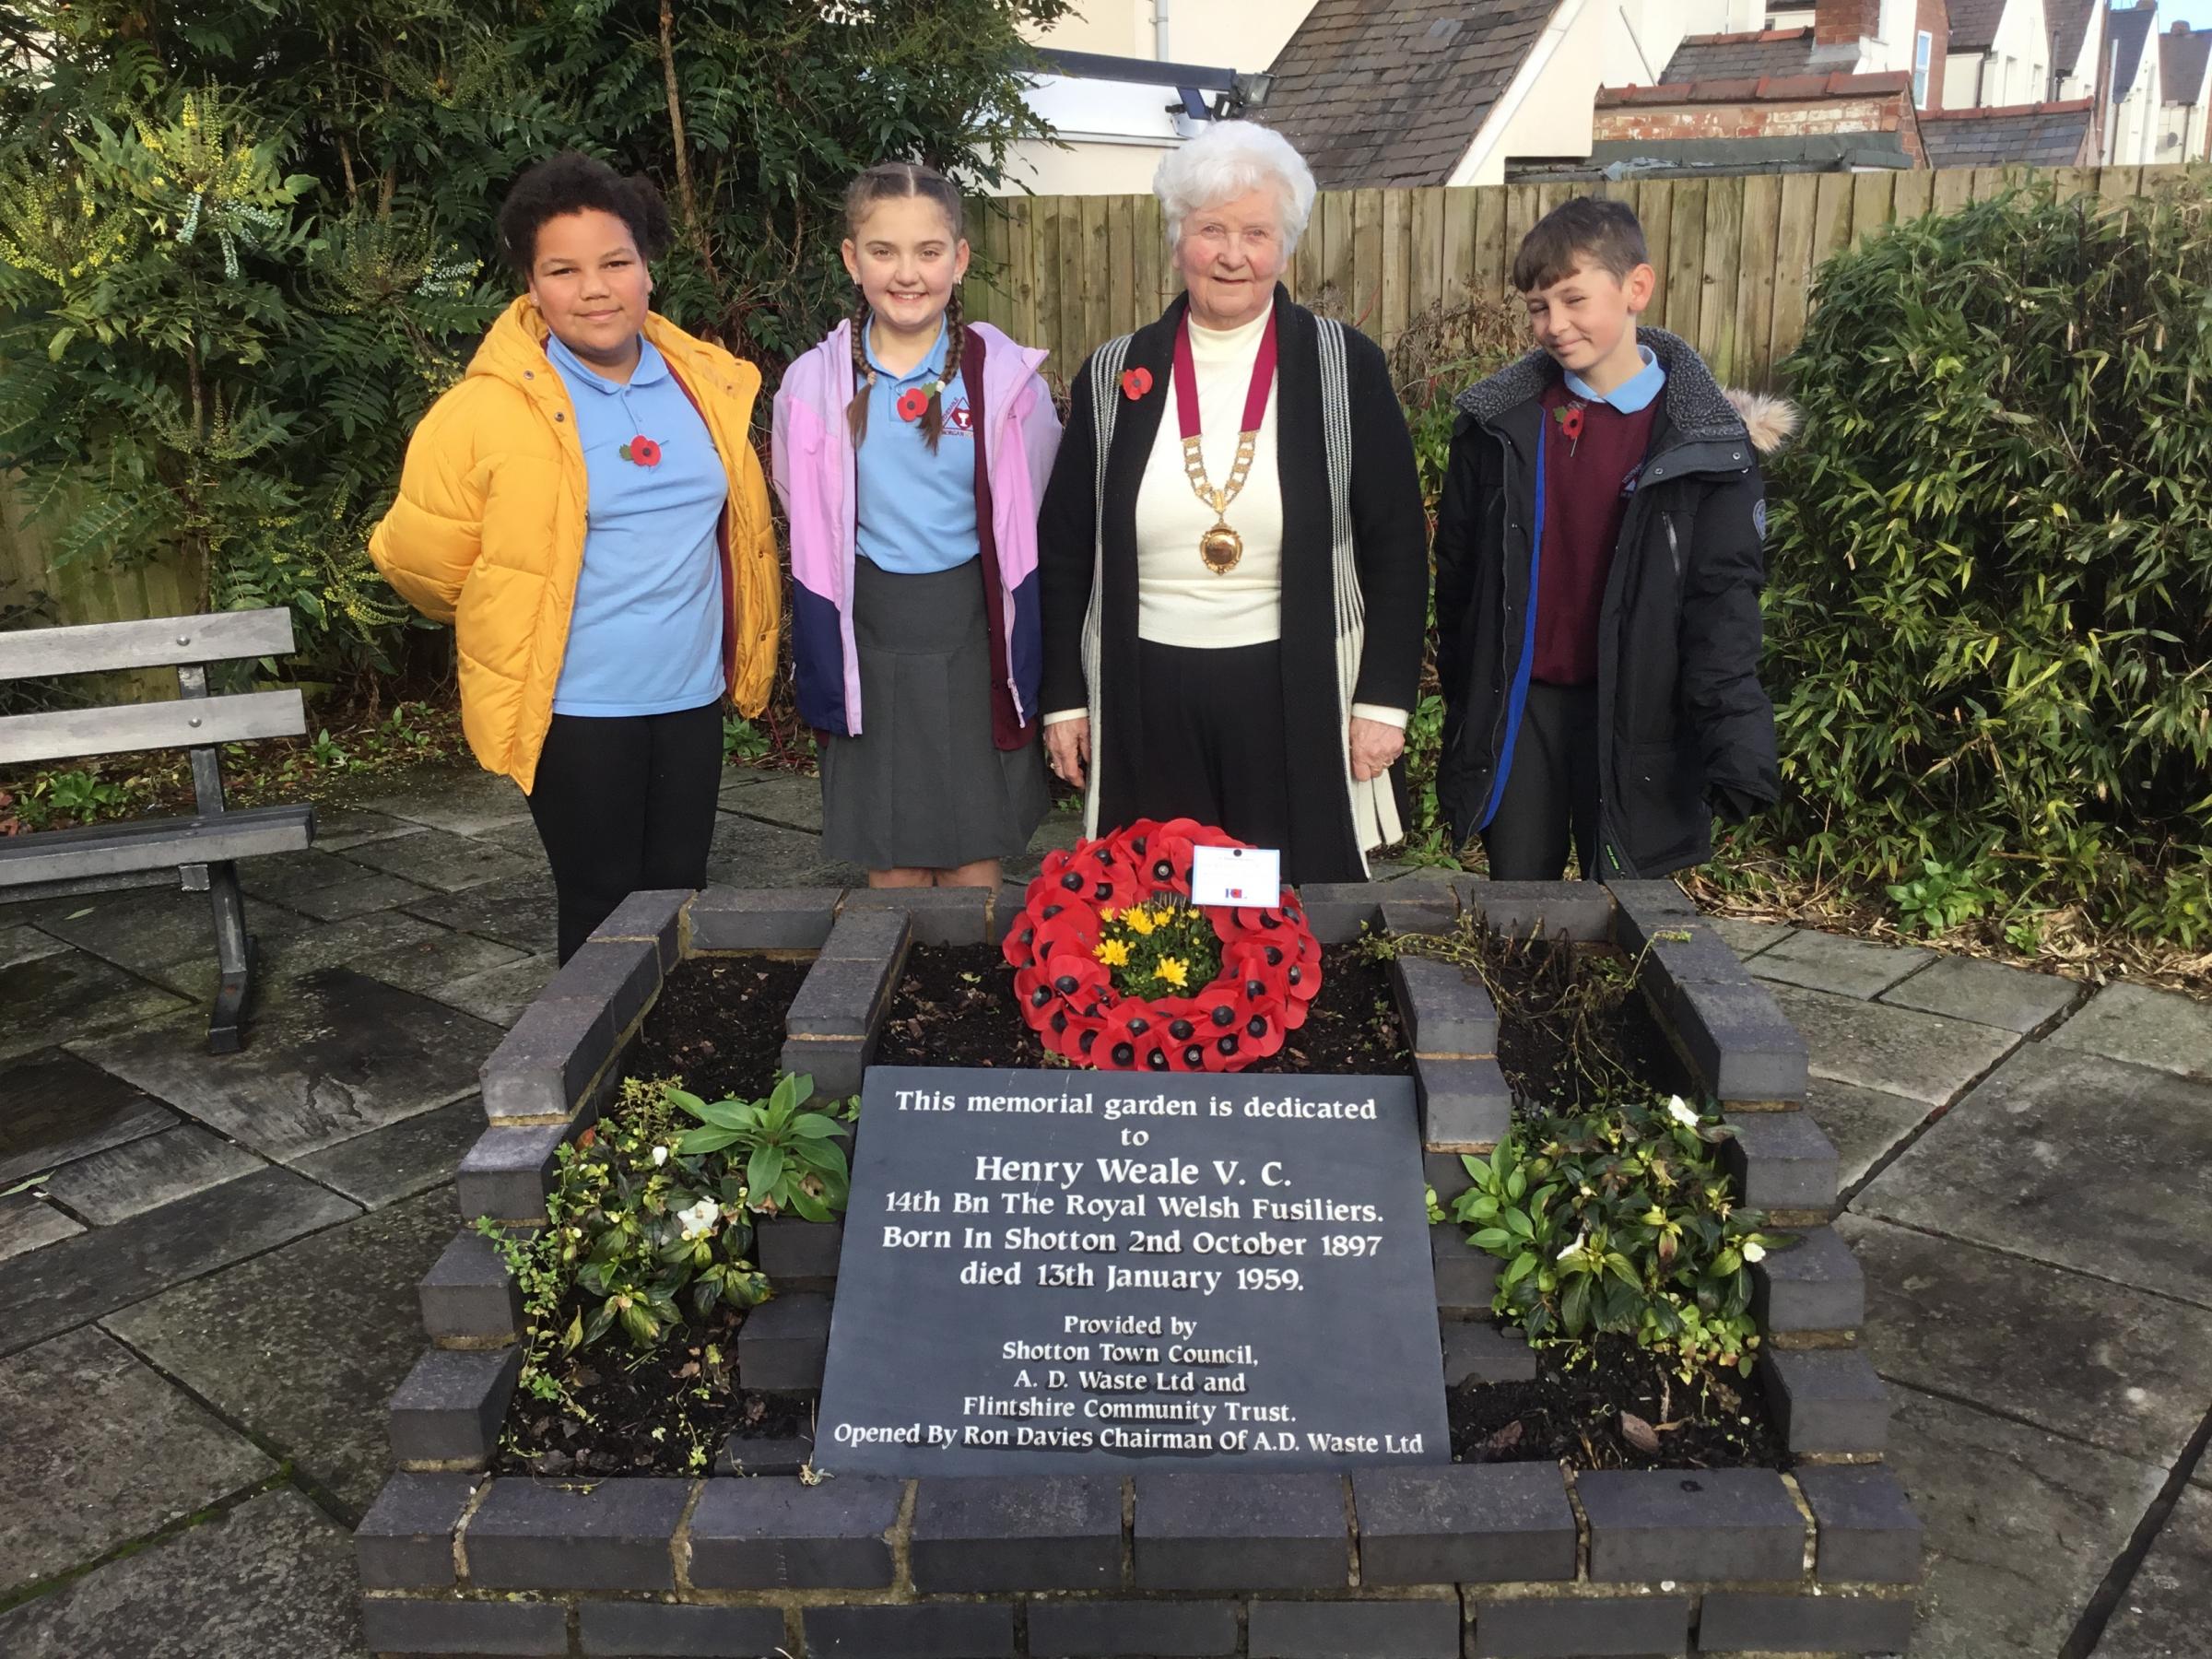 Venerable Edward Morgan School pupils paid their respects for Remembrance.